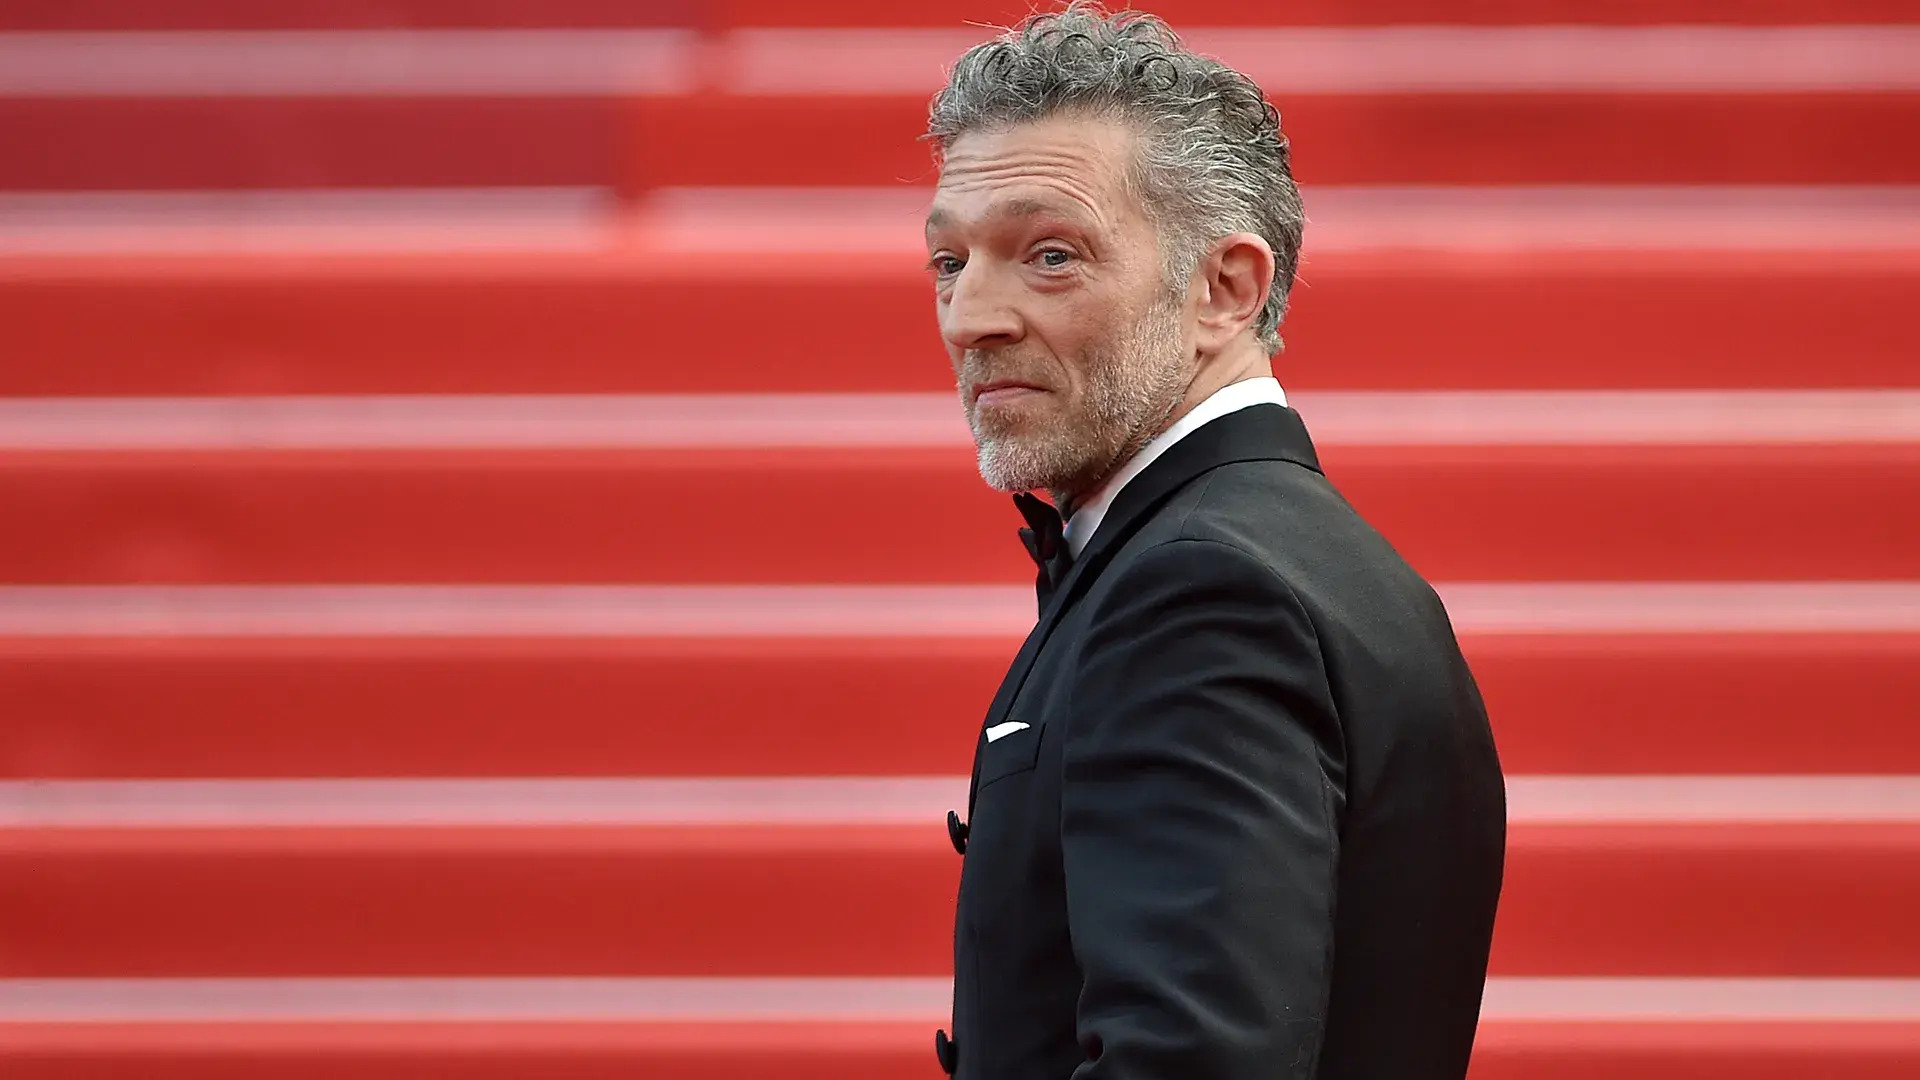 11 Fascinating Facts About Vincent Cassel - Facts.net